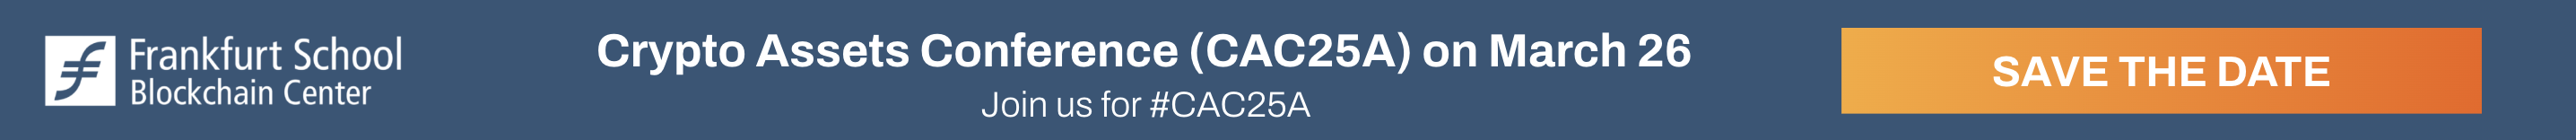 CAC25A